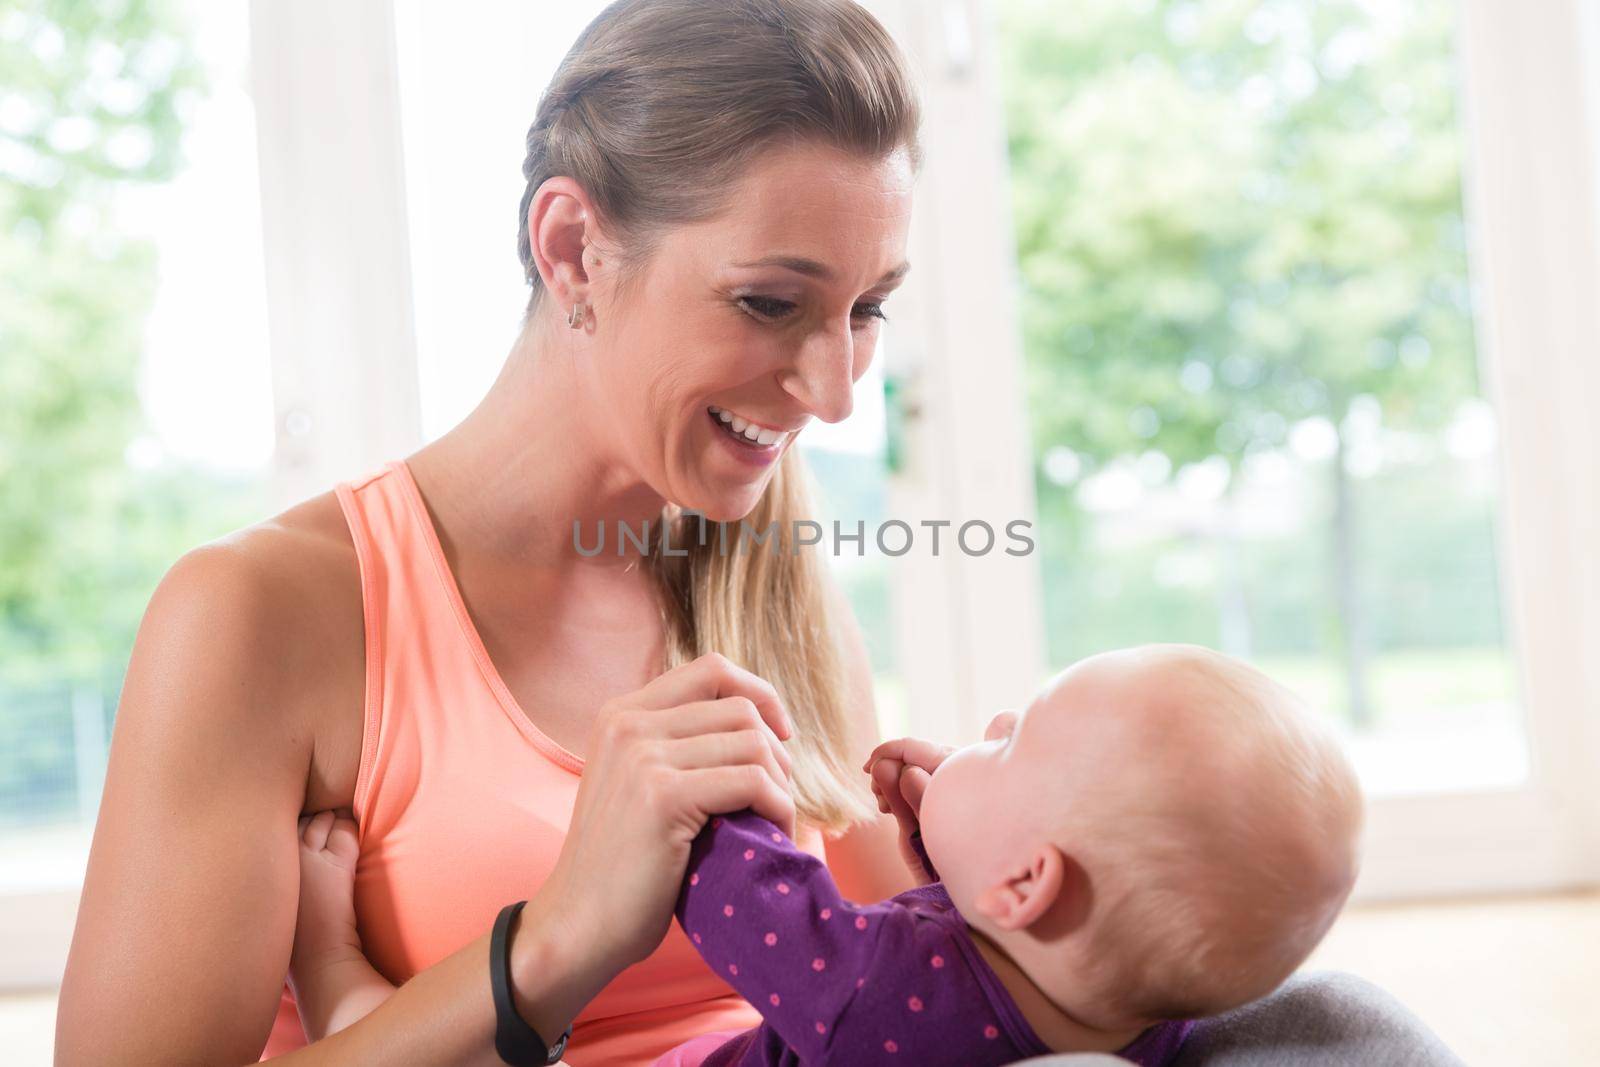 Mom and newborn baby playing together in baby course by Kzenon